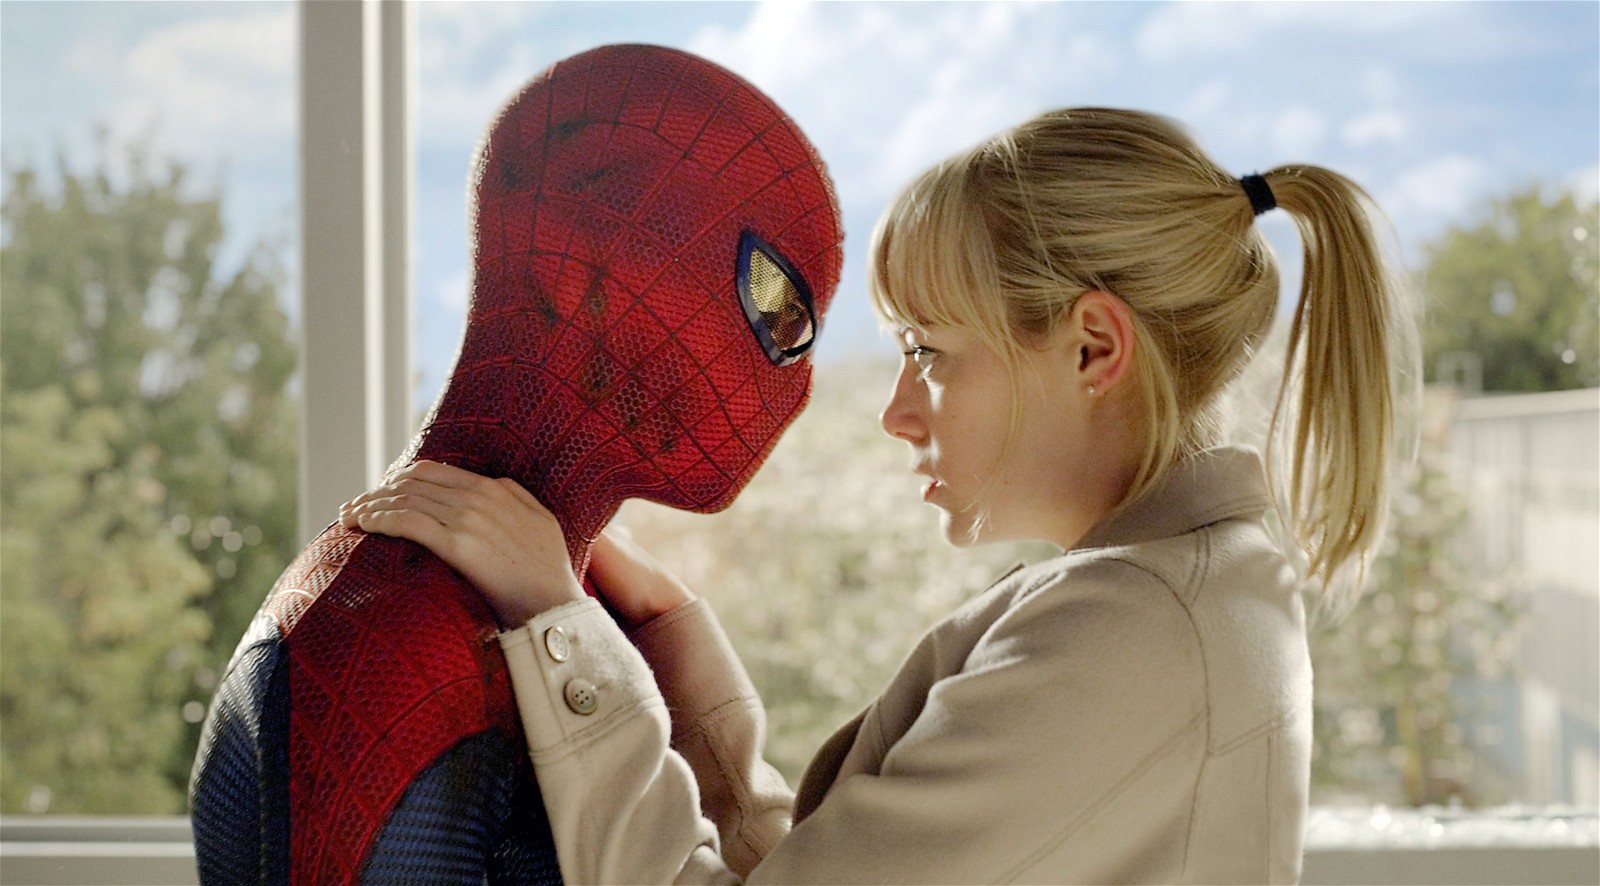 Emma Stone with Andrew Garfield in The Amazing Spider-Man